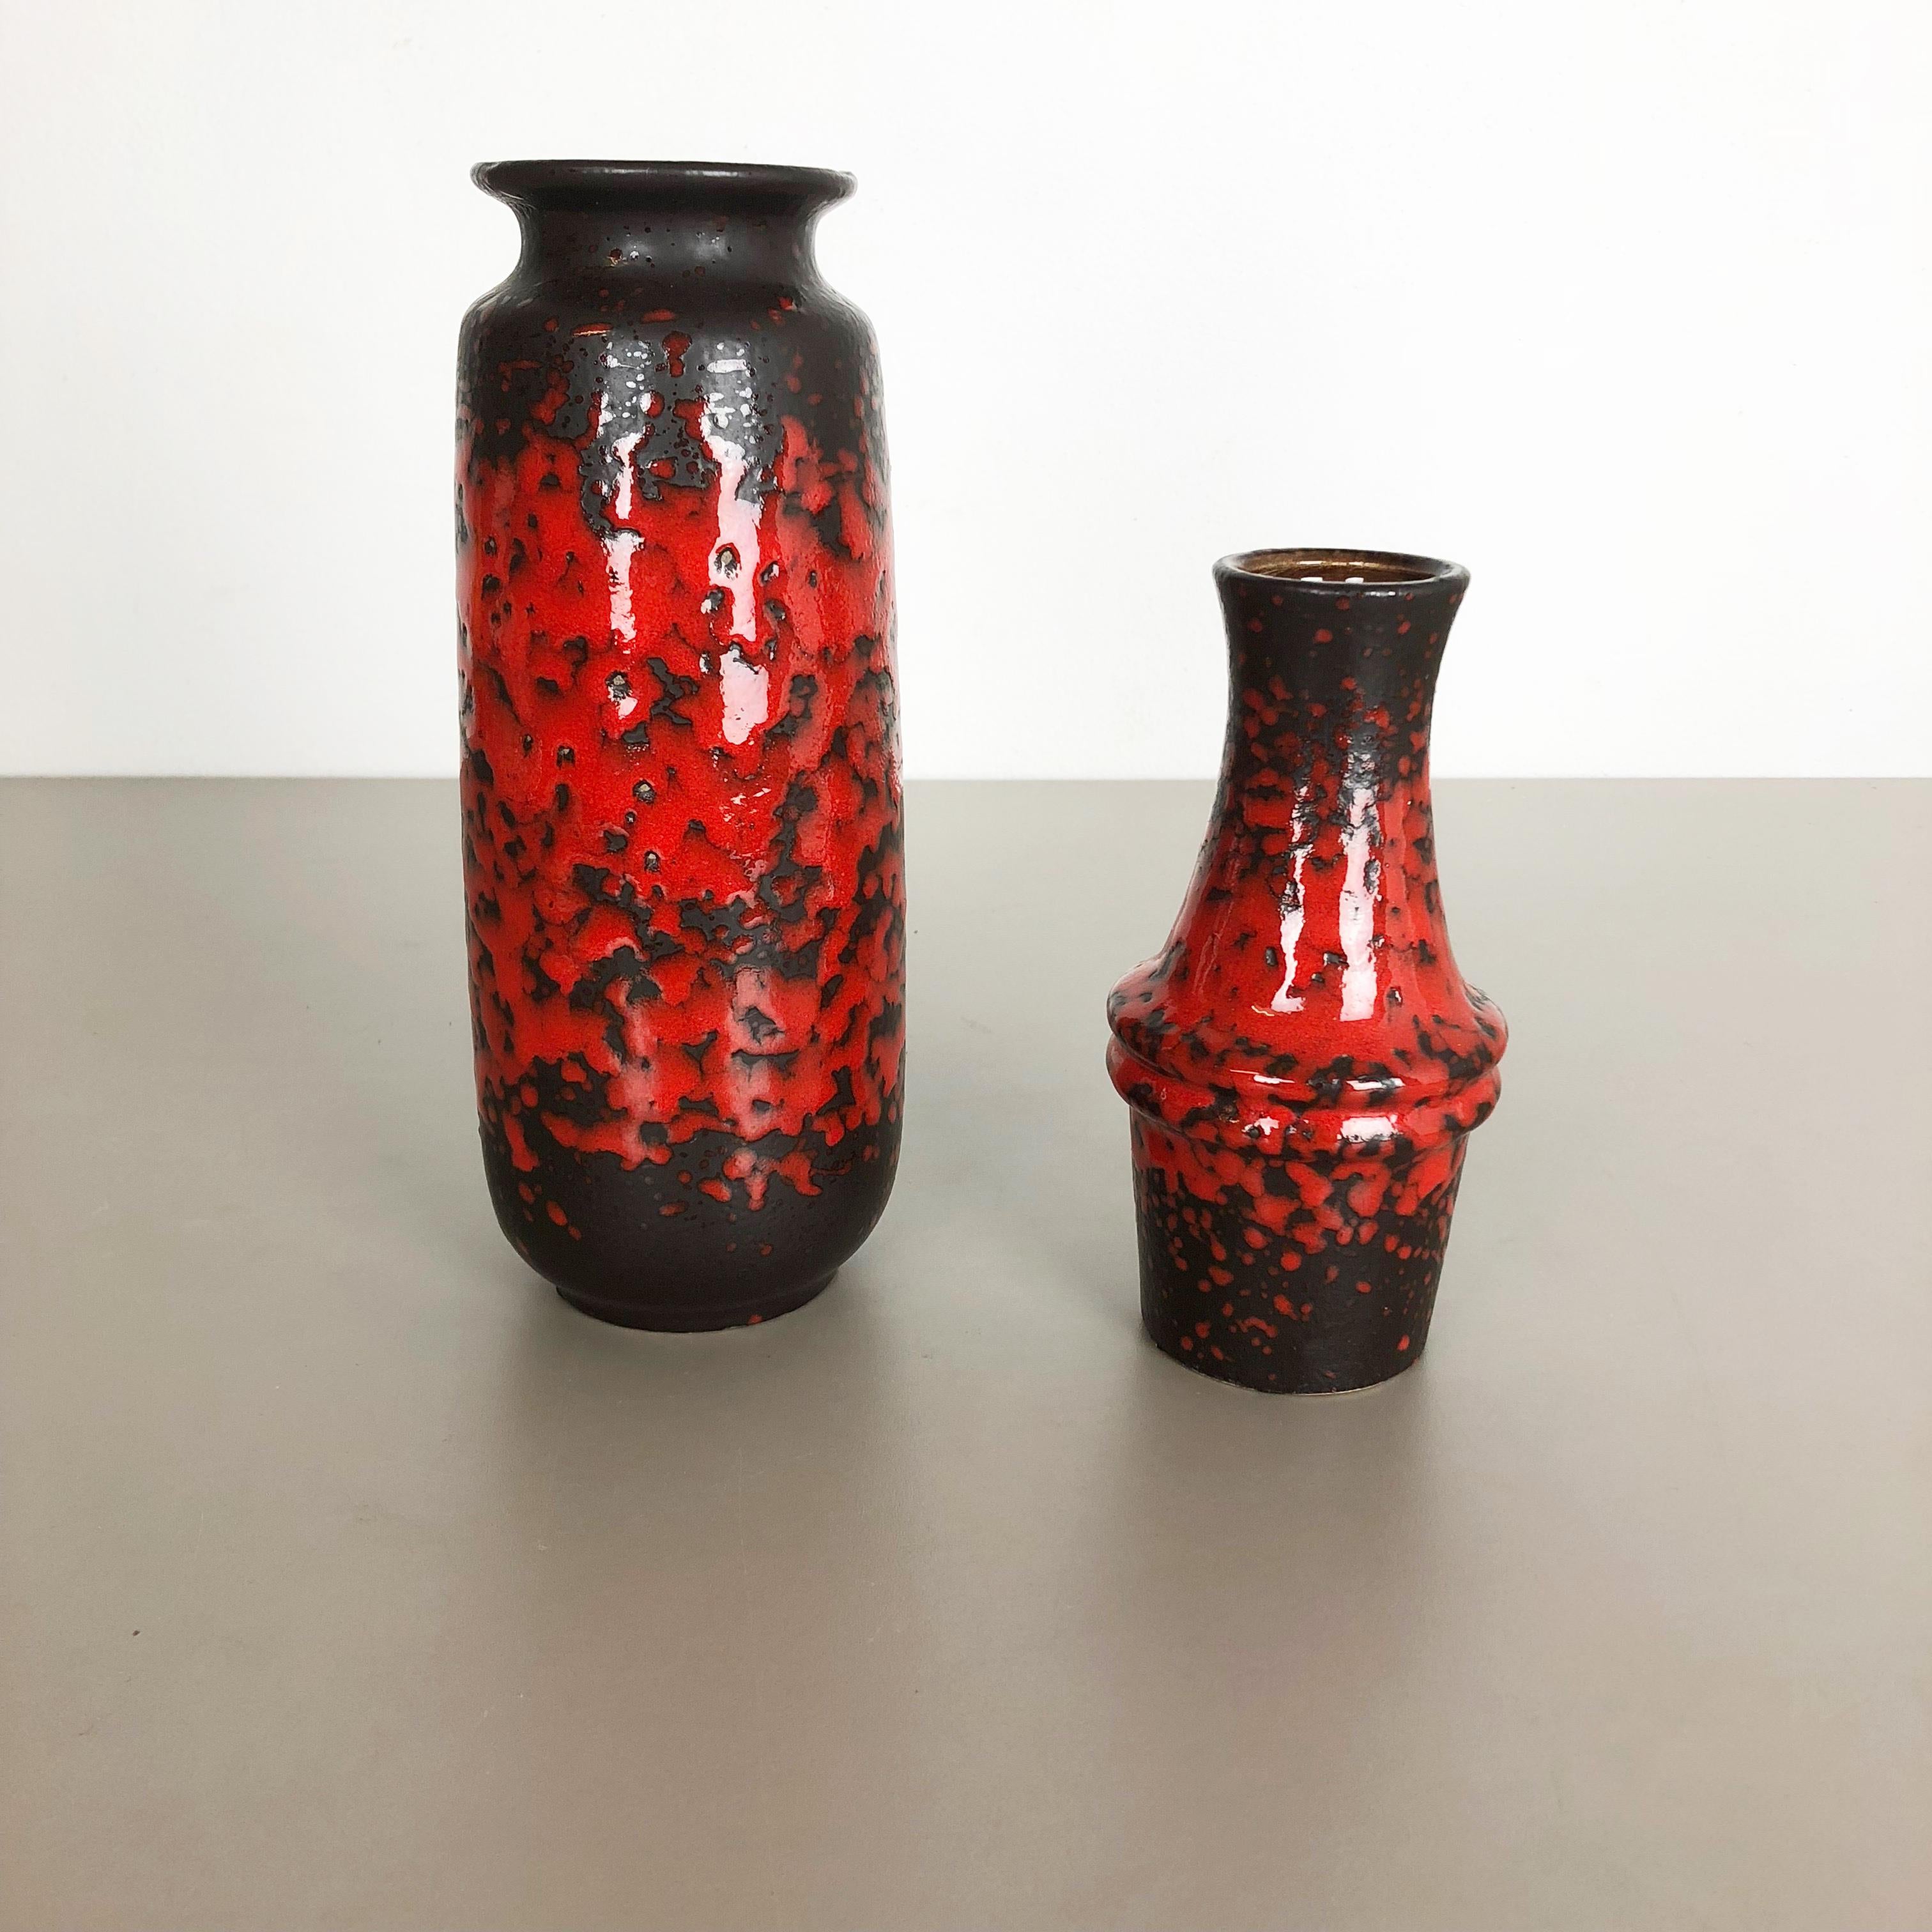 Article:

Set of two fat lava art vases

Model:
206-27
209-18



Producer:

Scheurich, Germany



Decade:

1970s




These original vintage vases was produced in the 1970s in Germany. It is made of ceramic pottery in fat lava